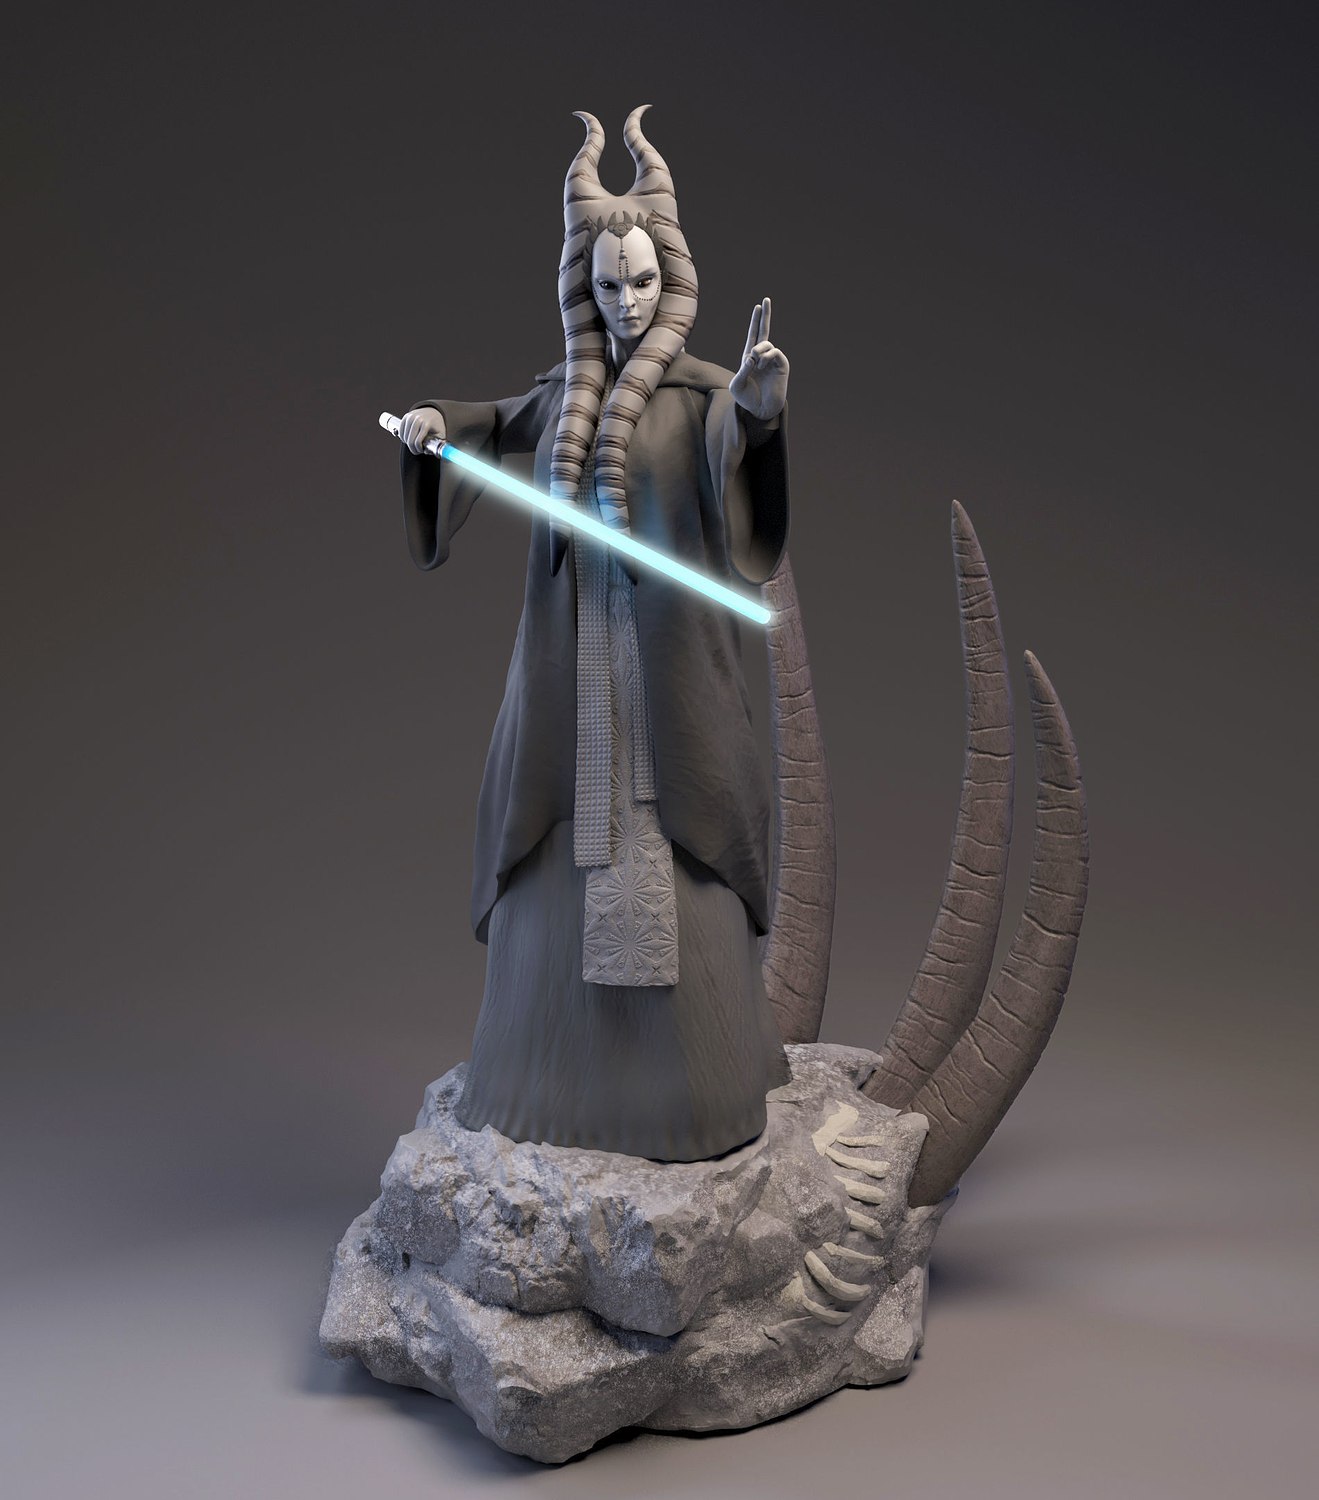 Shaak Ti Full Outfit from Starwars